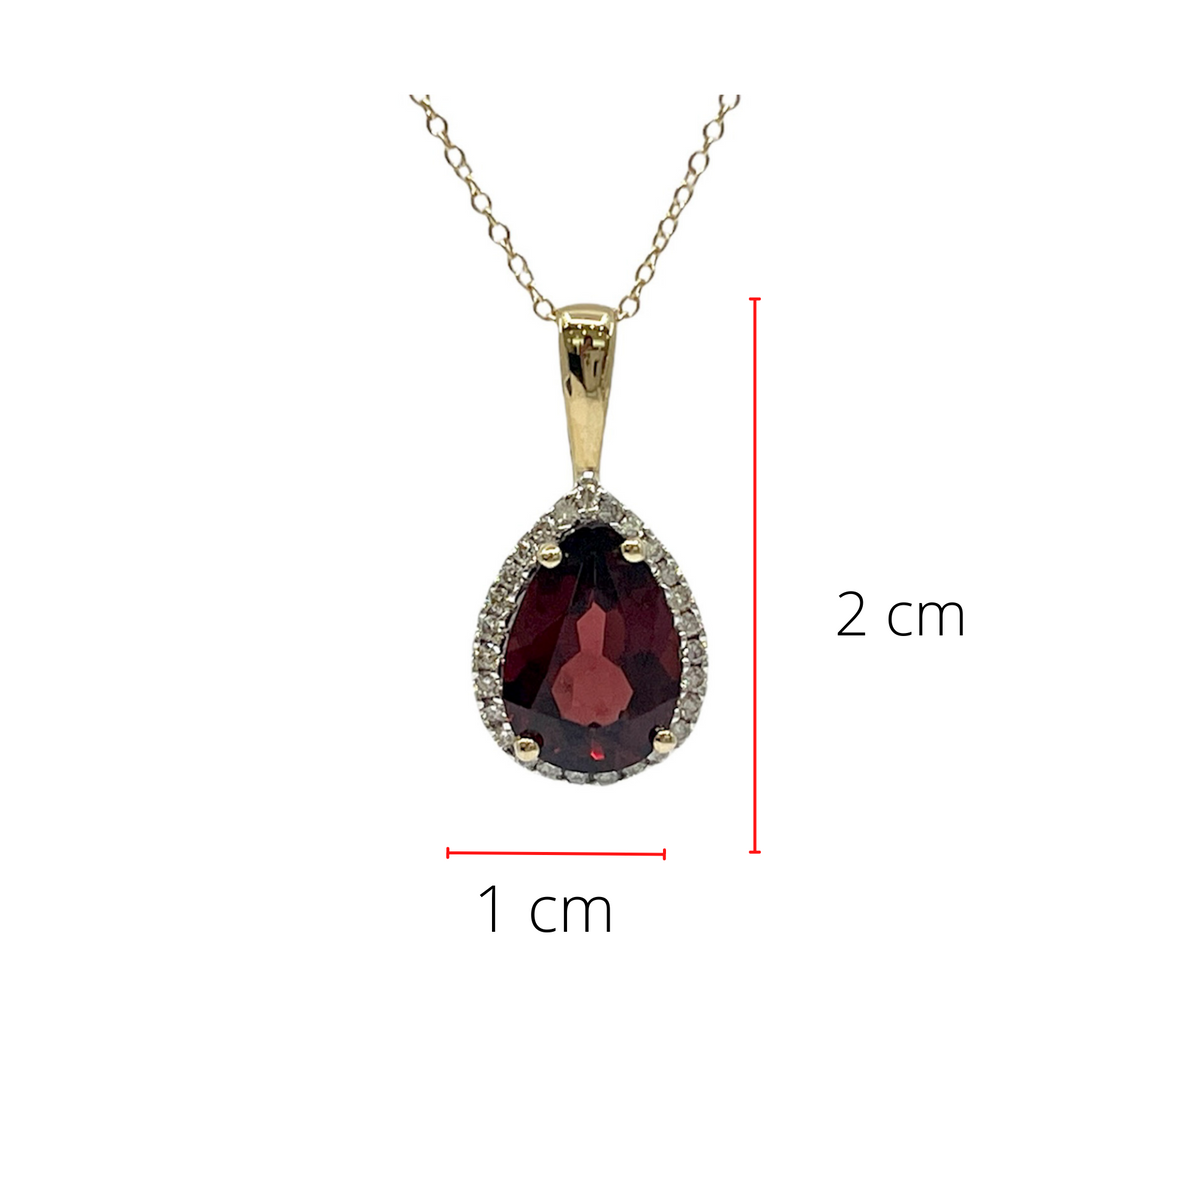 10K Yellow Gold 2.15cttw Garnet and 0.135cttw Diamond Necklace - 18 Inches